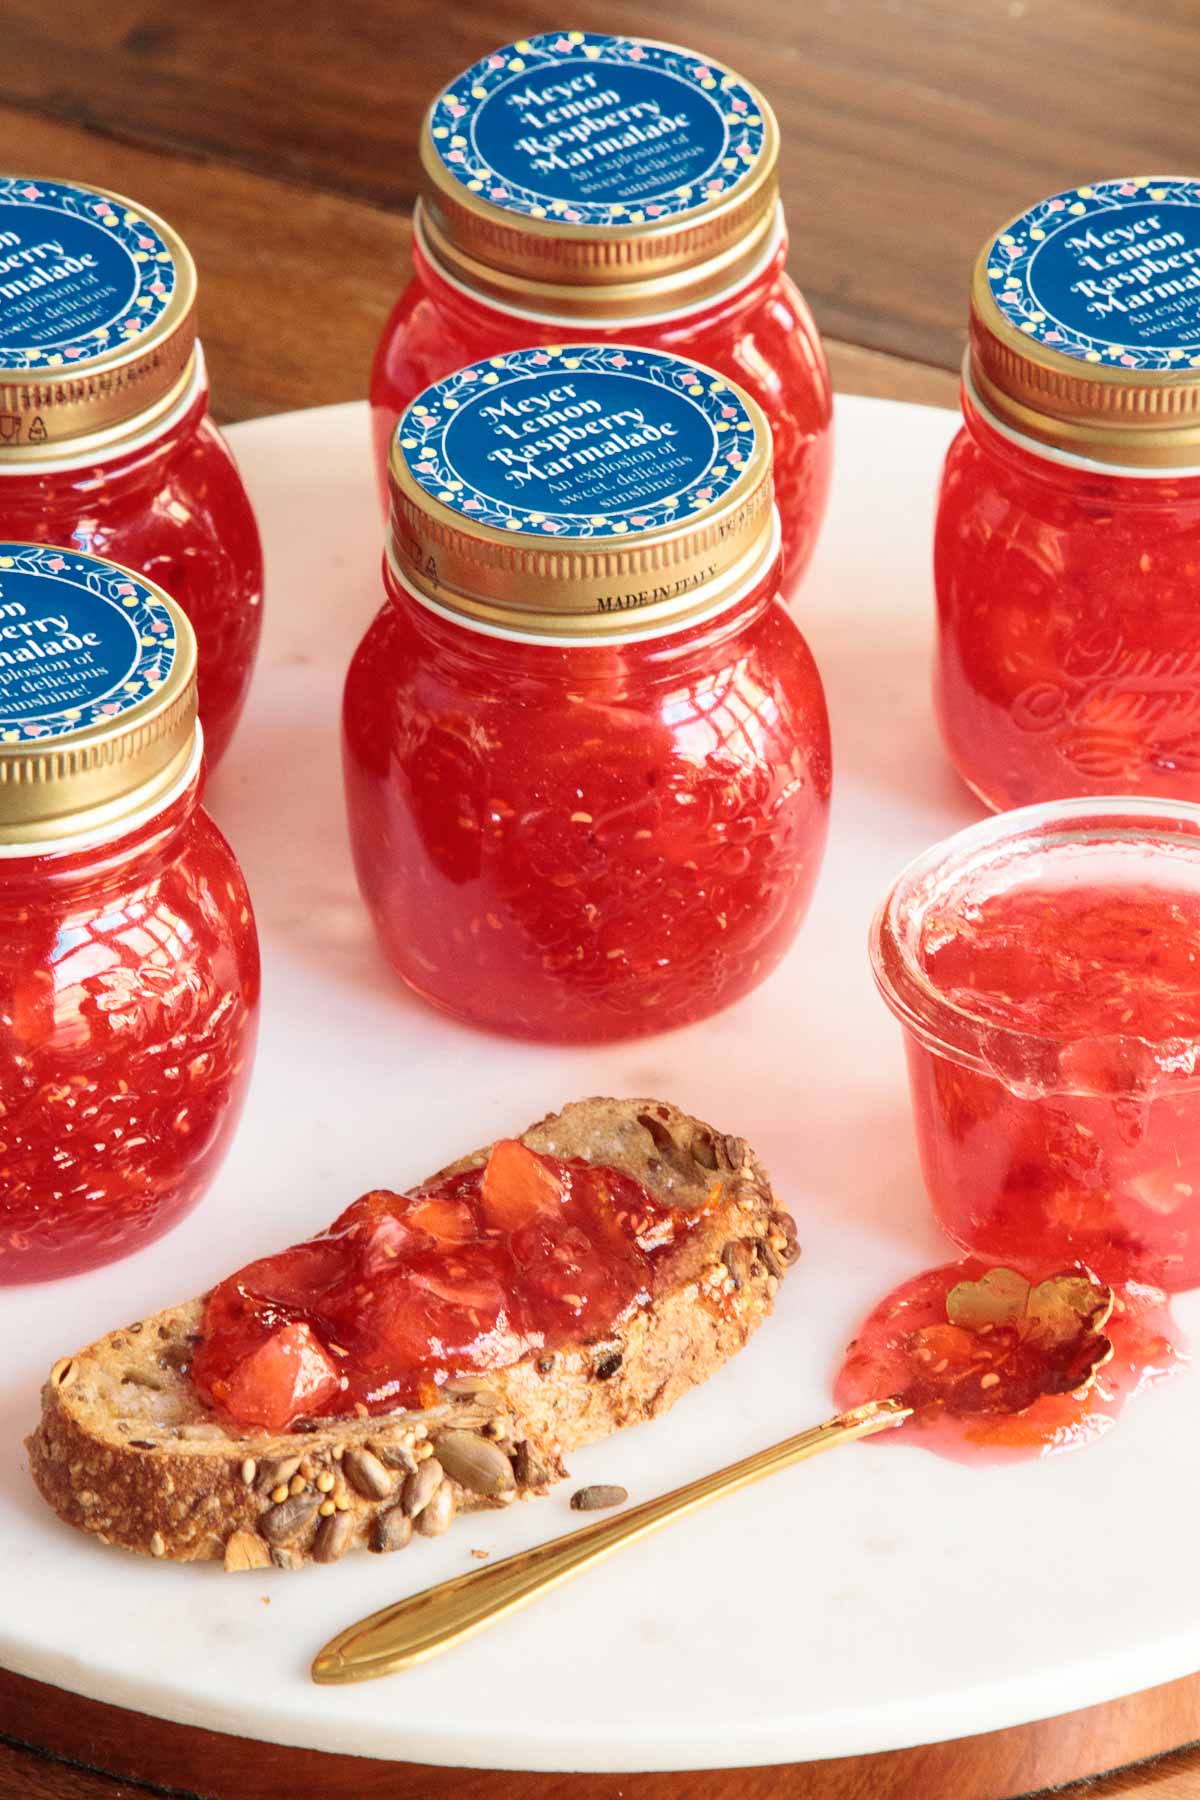 Vertical photo of jars of Raspberry Meyer Lemon Marmalade with blue custom gift labels on the tops of the jars.